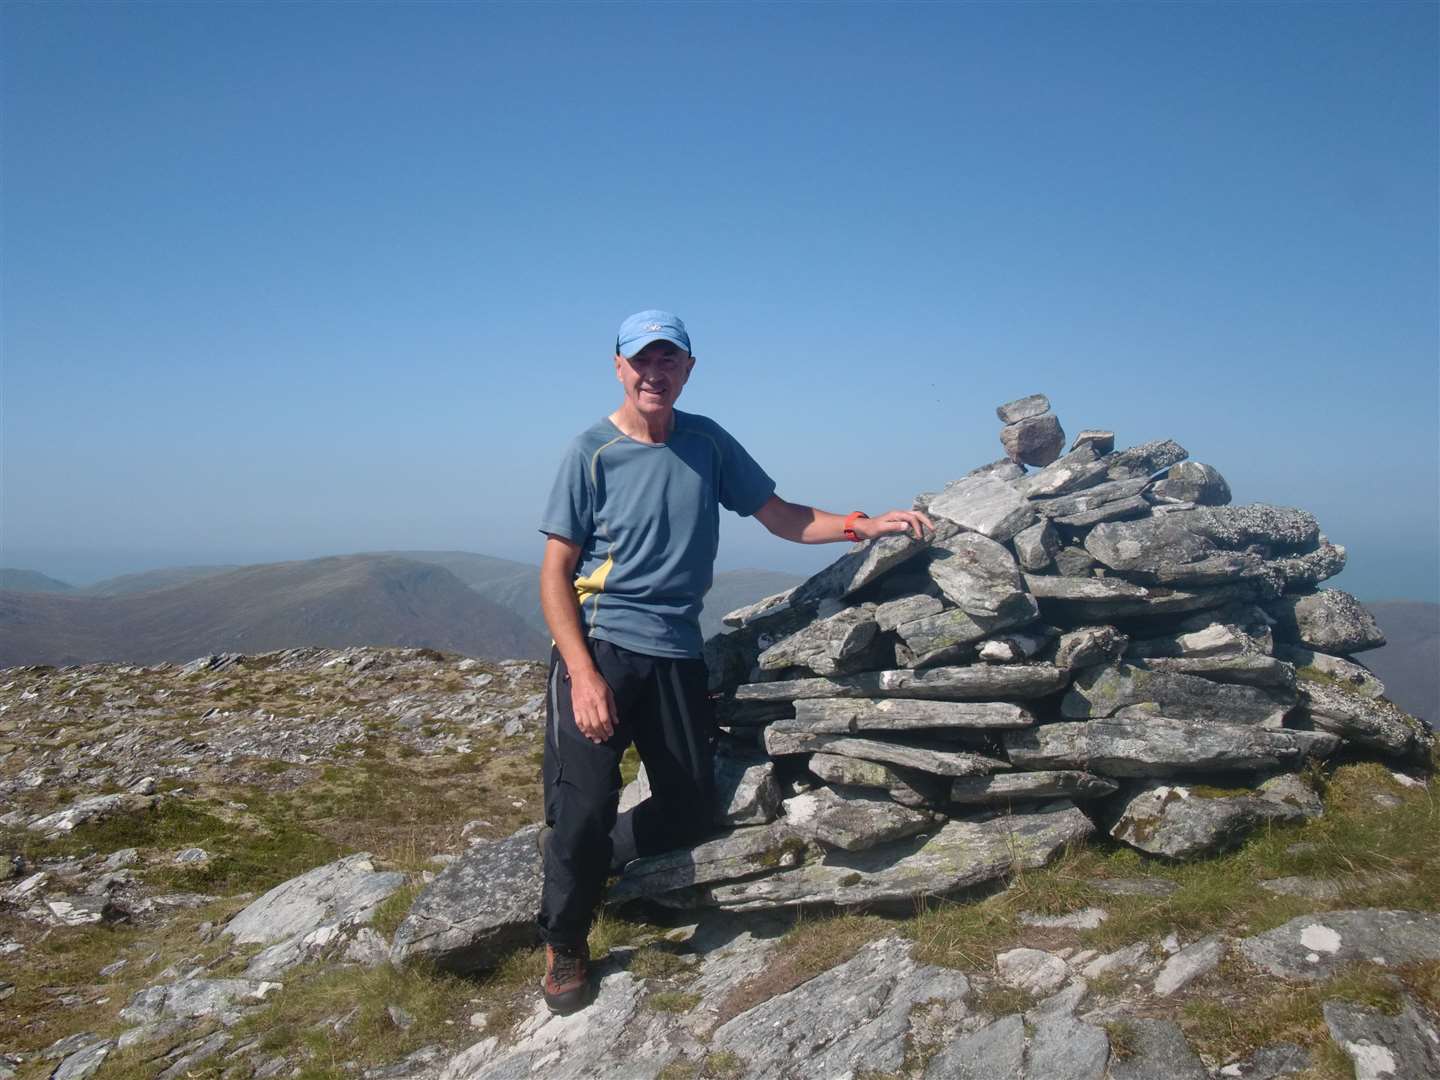 Peter at the summit cairn.